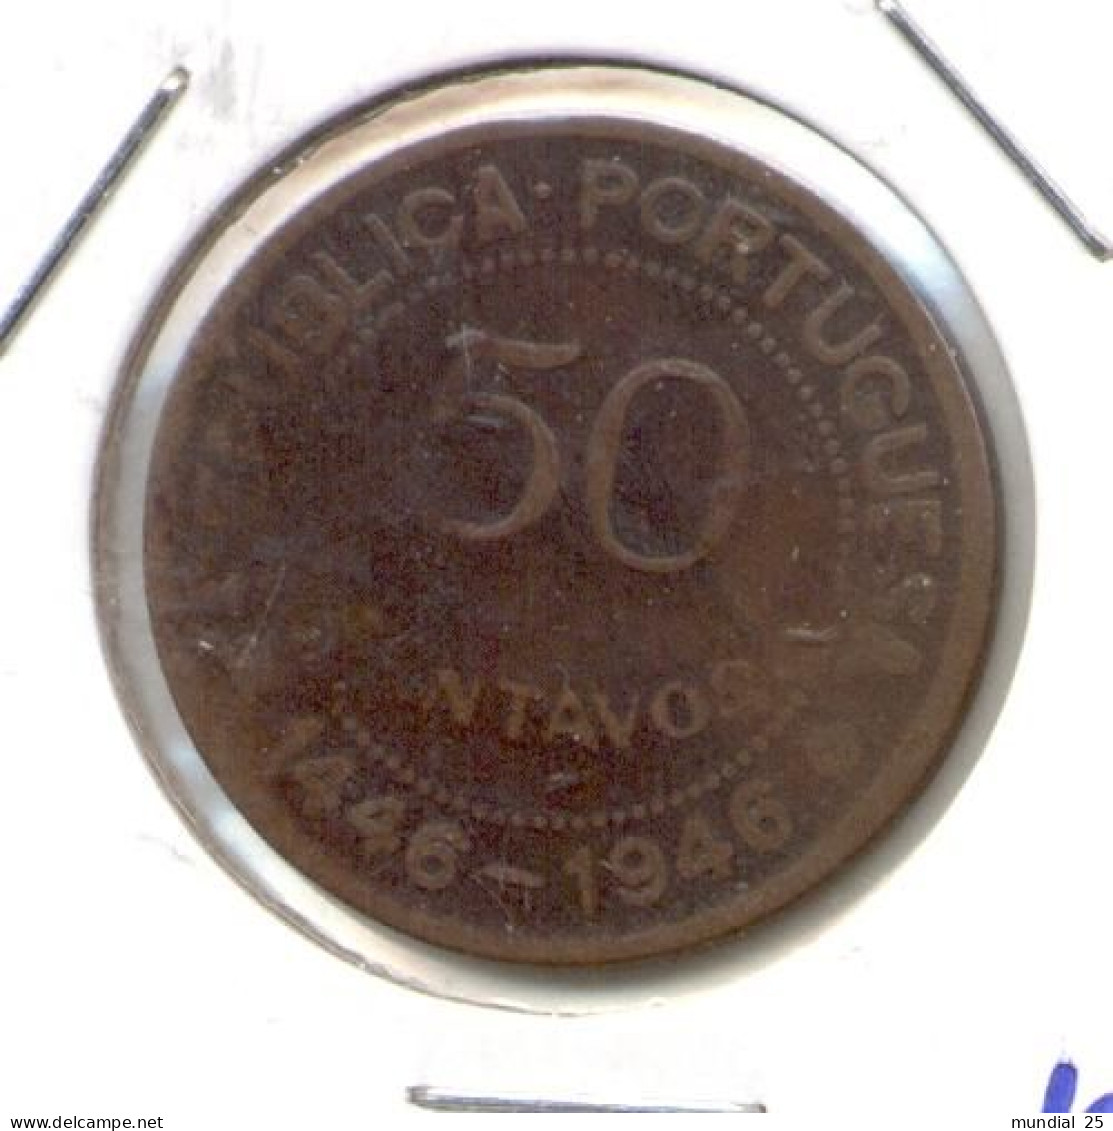 GUINEA-BISSAU PORTUGAL 50 CENTAVOS N/D (1946) - 500th ANNIVERSARY OF DISCOVERY - Guinea-Bissau